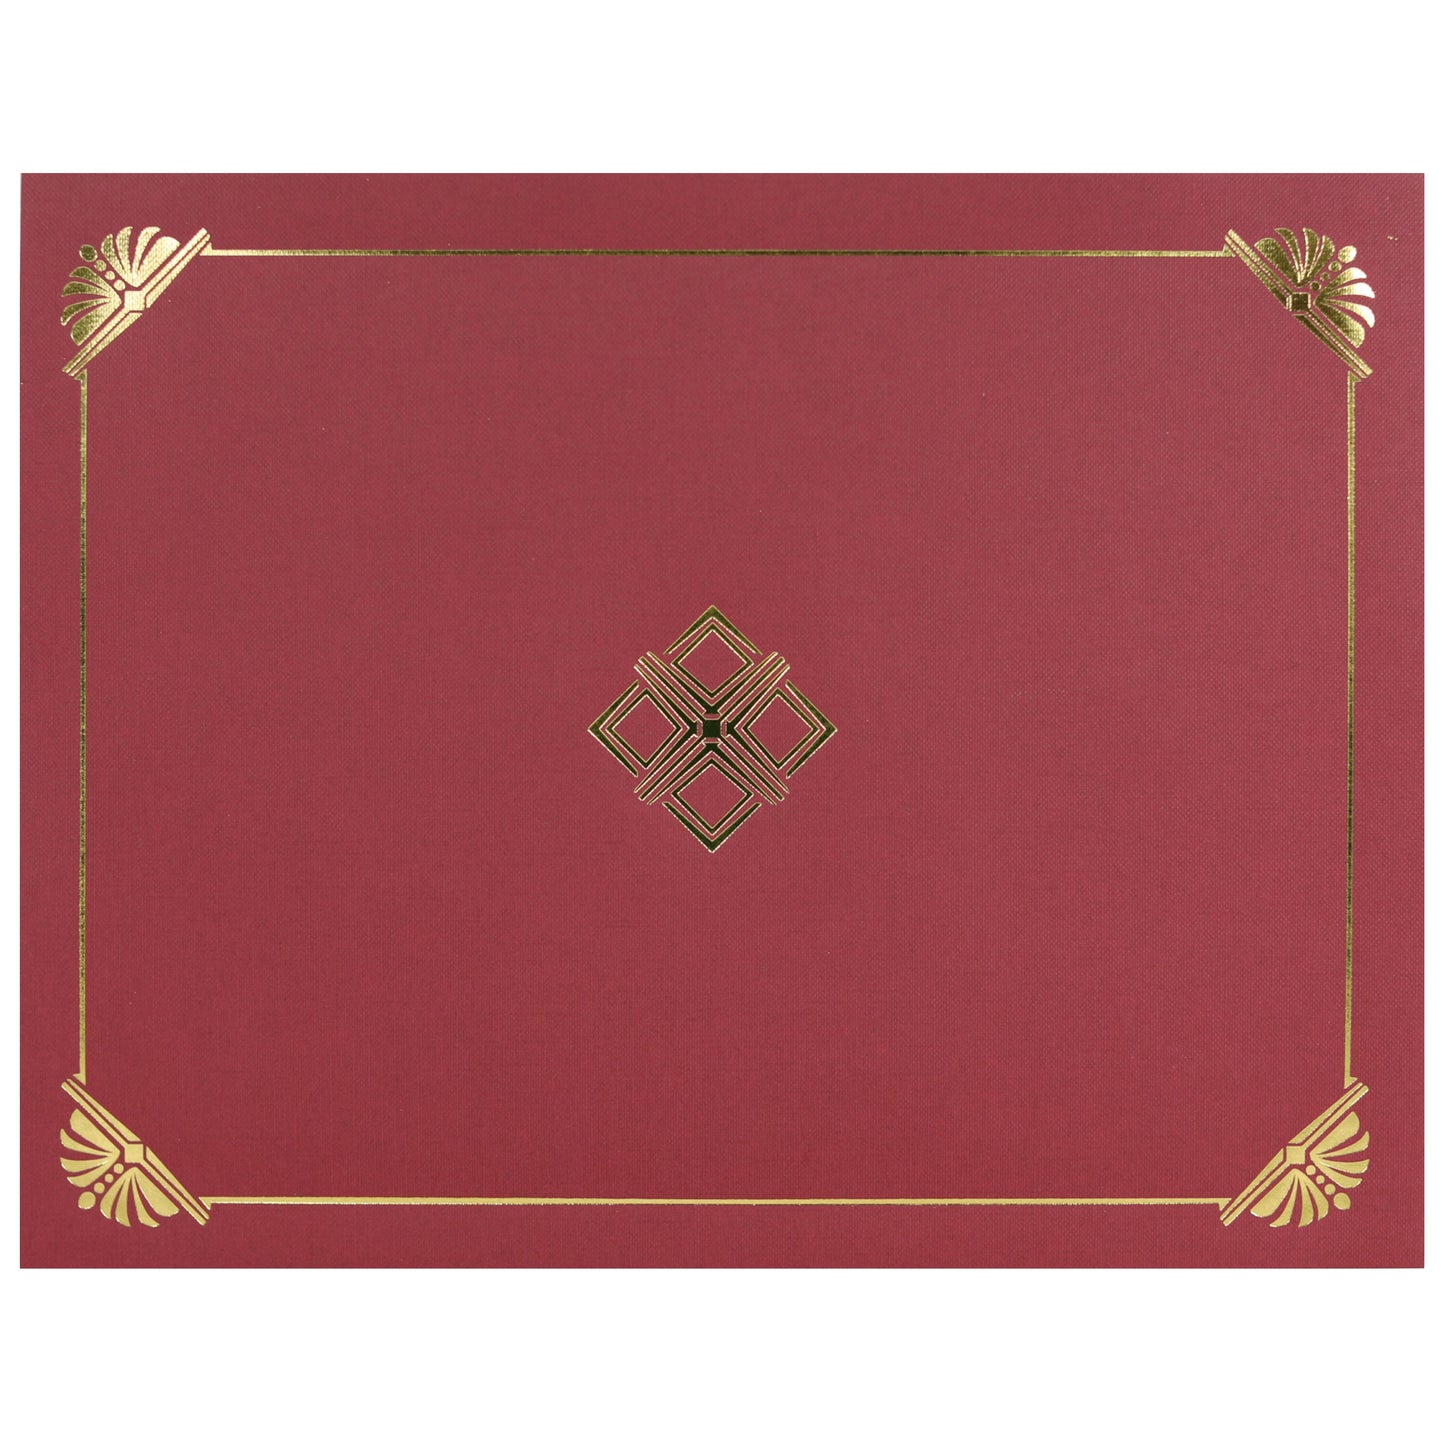 St. James® Certificate Holders/Document Covers/Diploma Holders, Red, Gold Foil, Linen Finish, Pack of 5